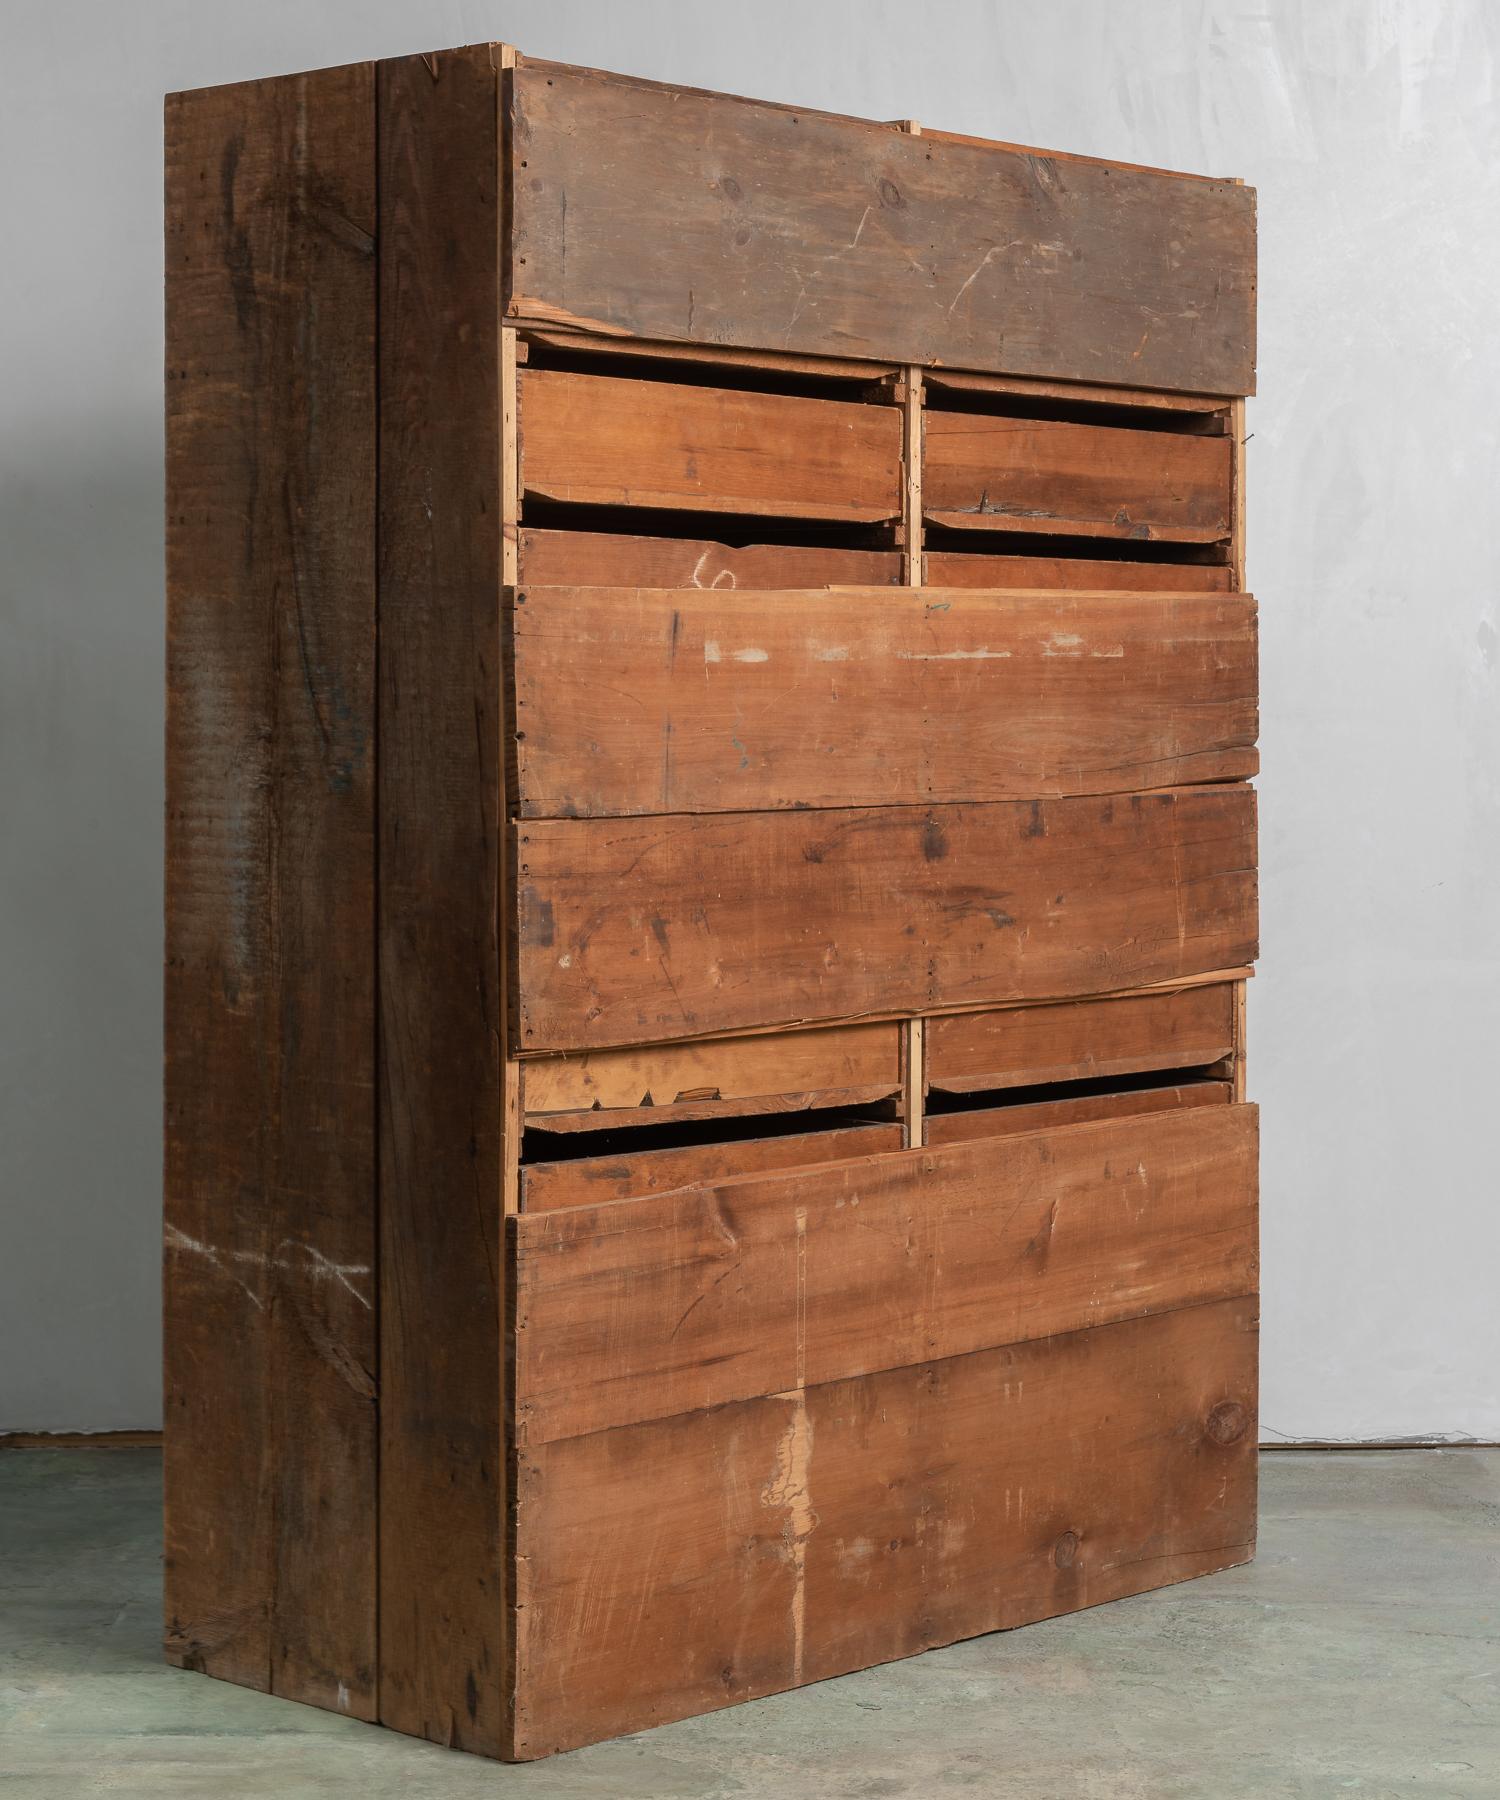 Wood Built-In Archival Bank of Drawers, America, circa 19th Century